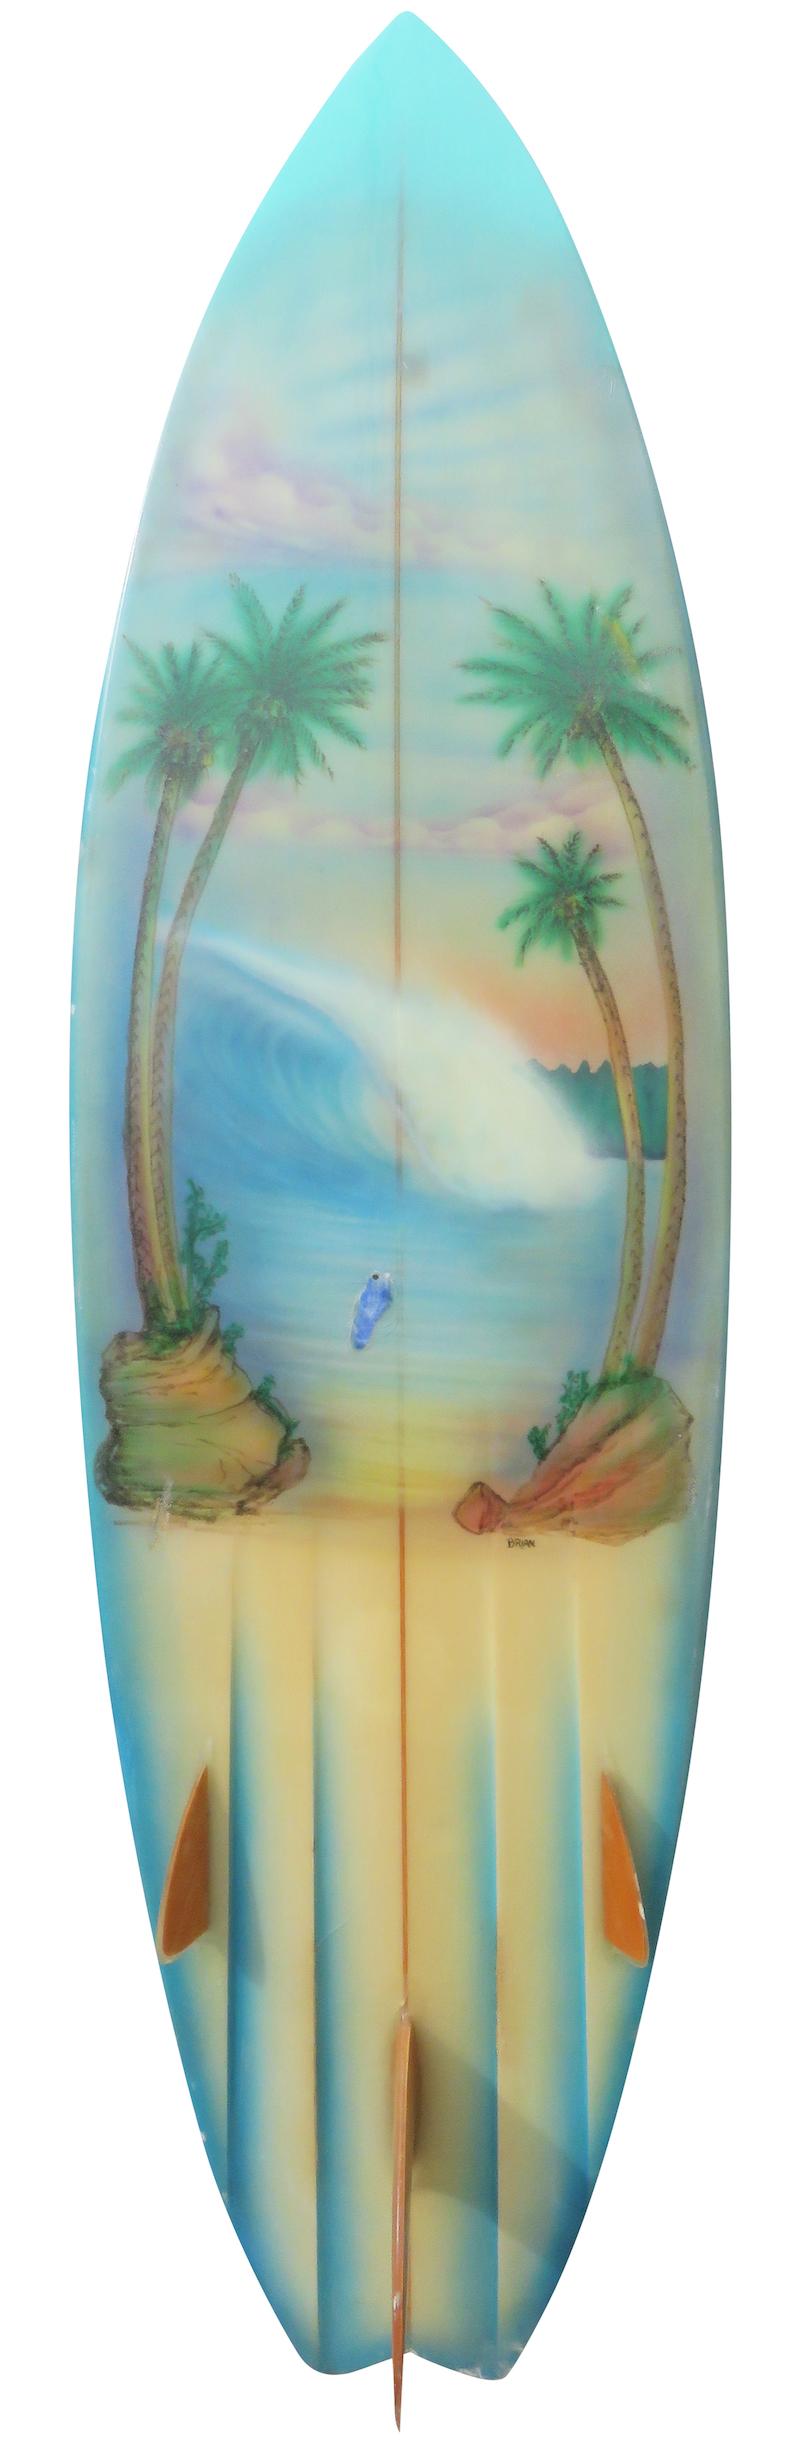 1980's Vintage Mural art surfboard shaped by Jerry Grantham. Featuring two unique airbrushed wave art murals on the deck and bottom of board. Signed by artist “Brian”. This board is complete with a bonzer tri-fin setup which was a revolutionary